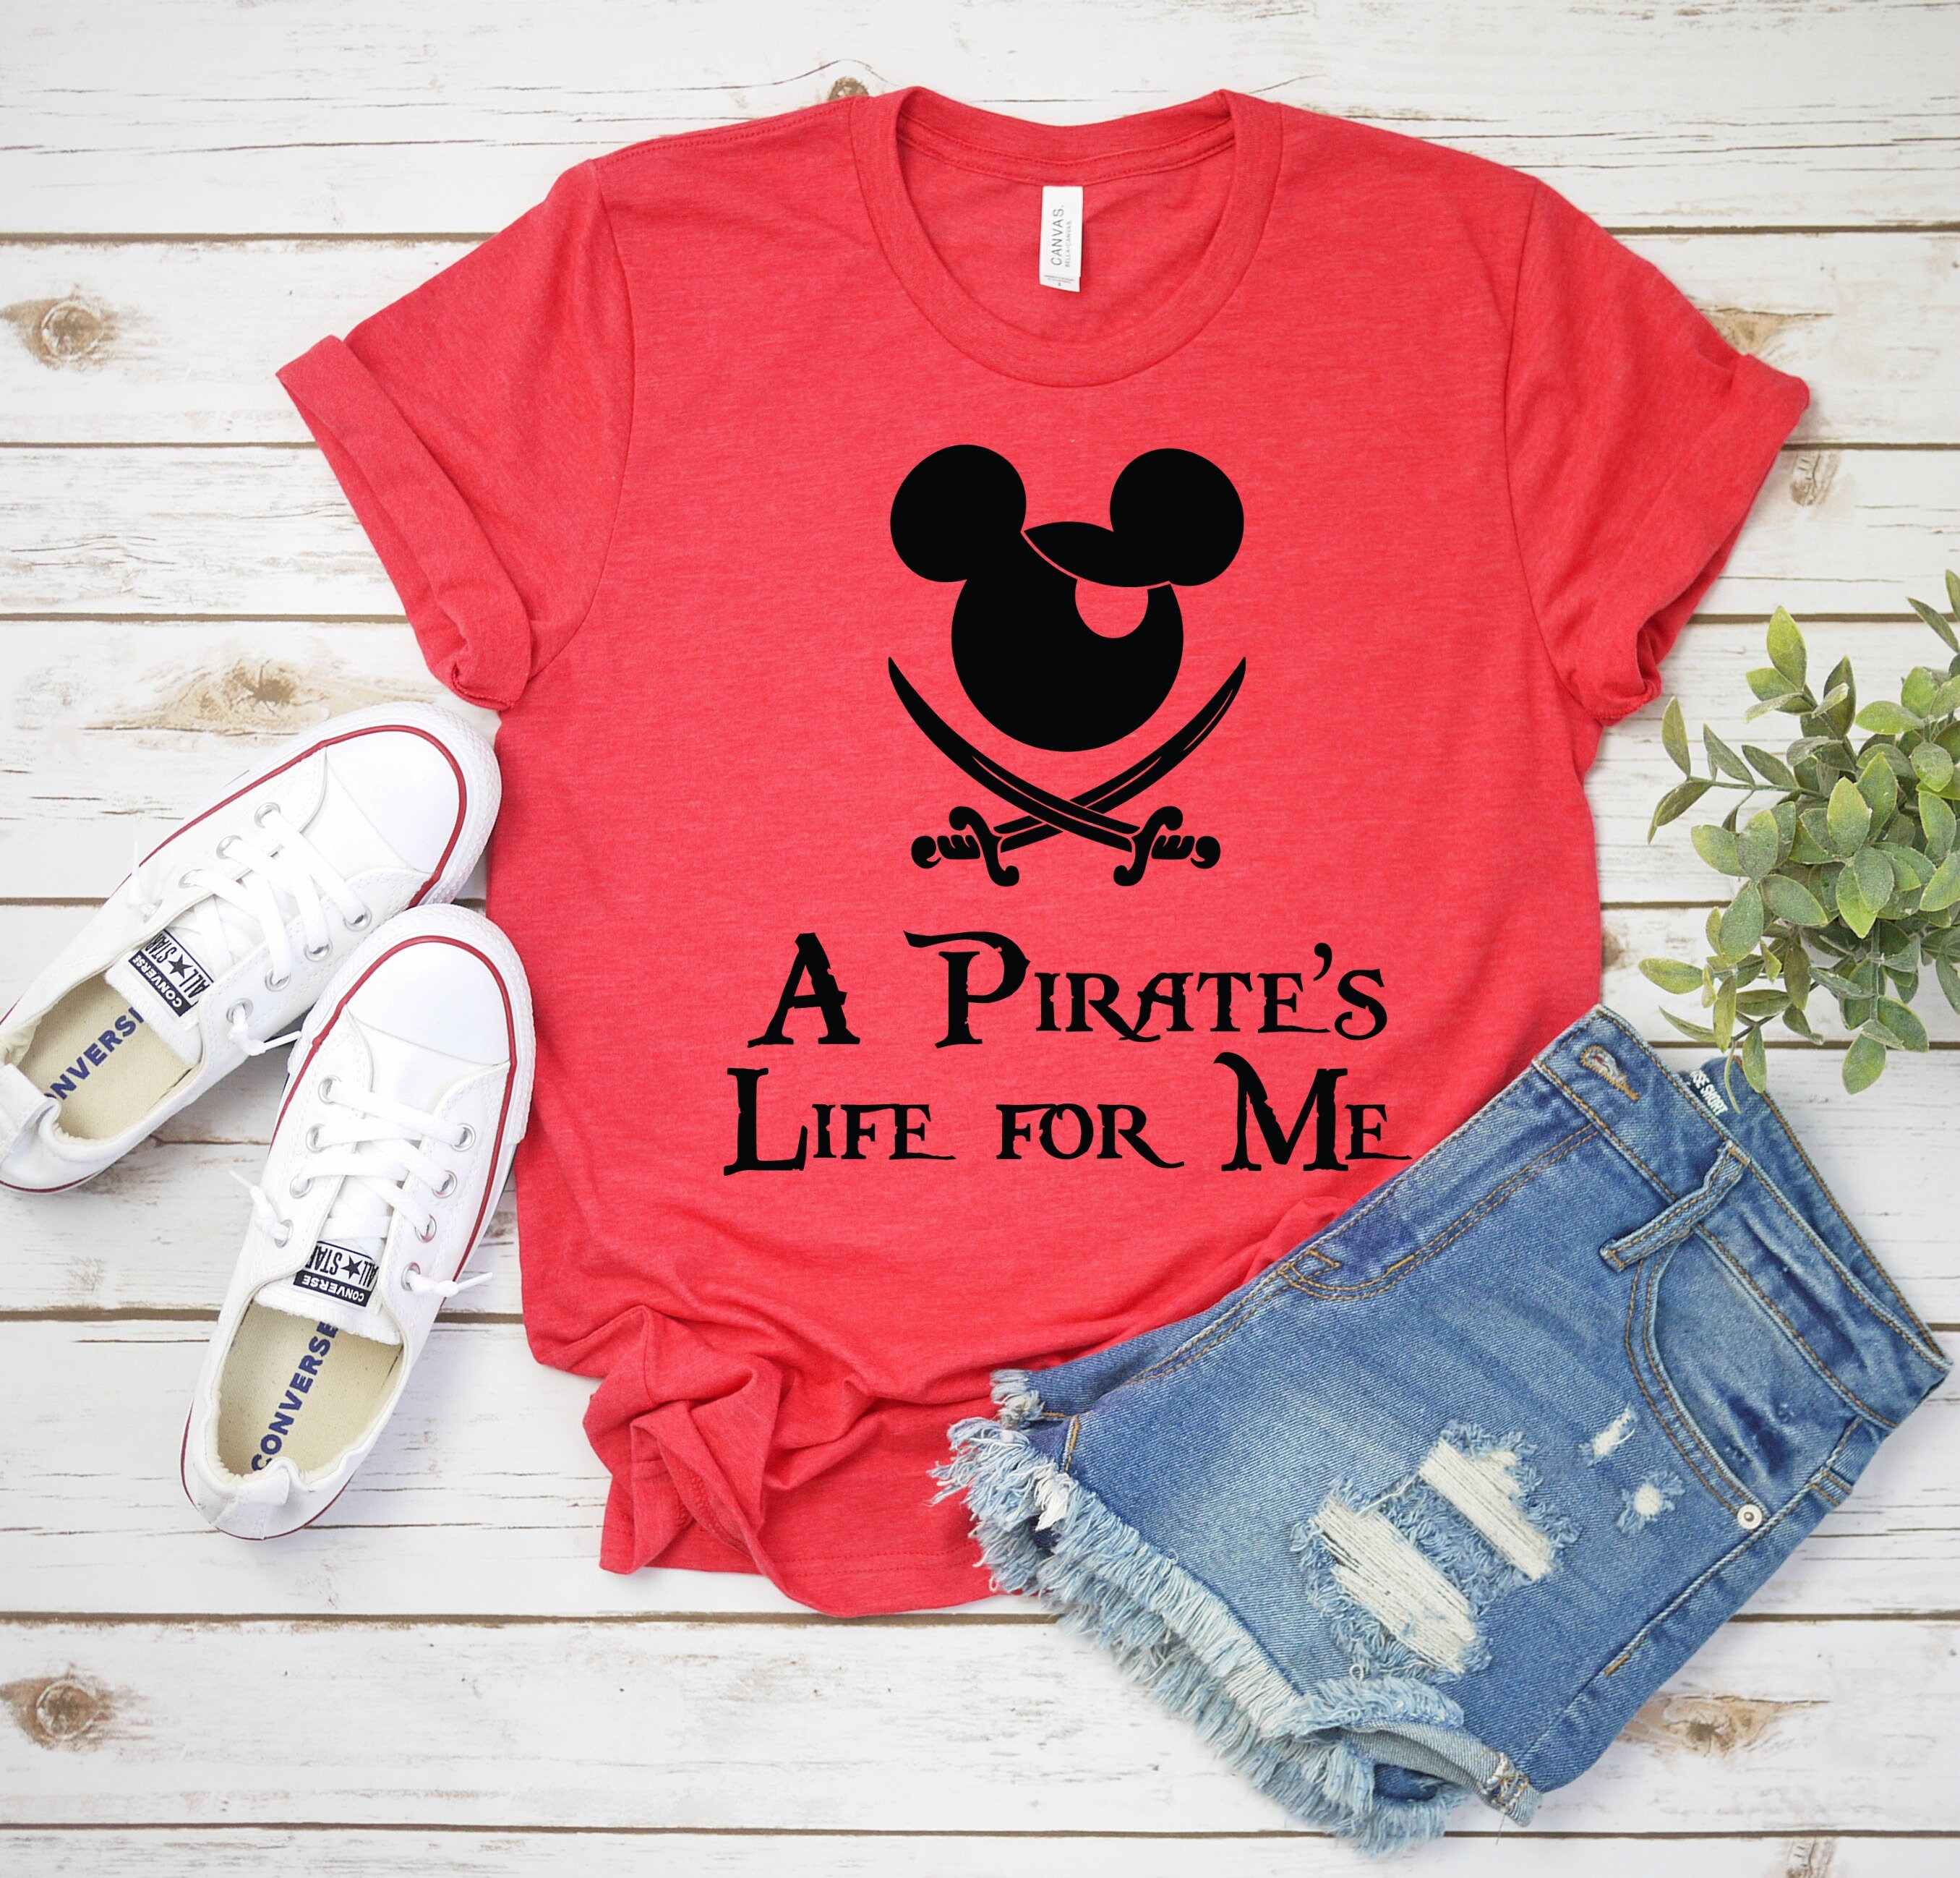 Discover Mickey pirate's life for me shirt, Disney cruise shirt for women, Disney pirate shirt, Mickey cruise shirts